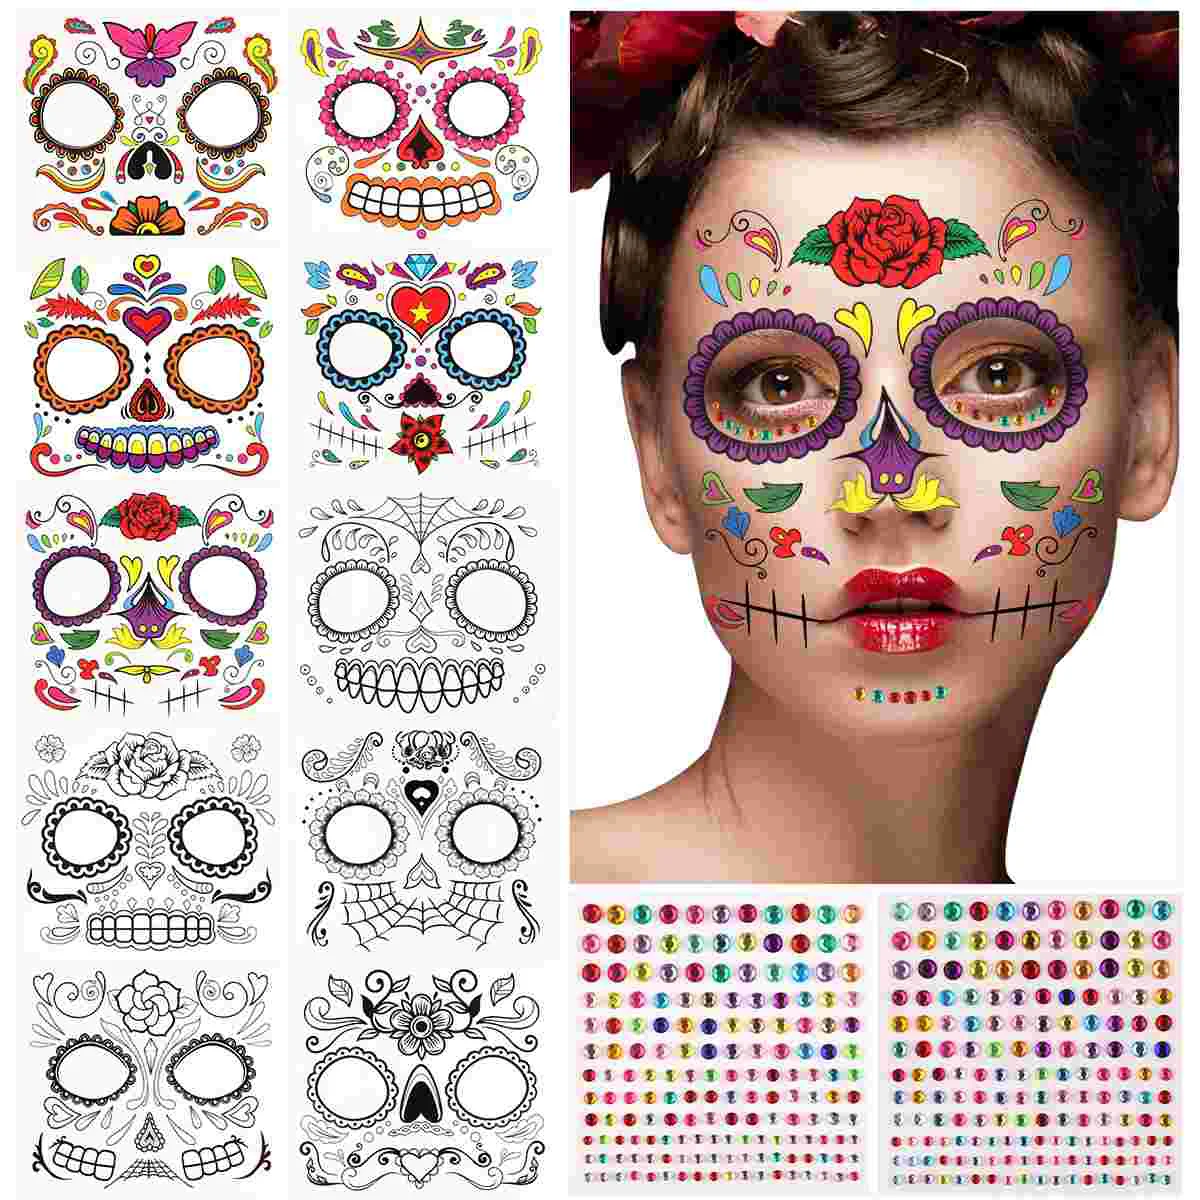 

FRCOLOR 10 Sheets Halloween Temporary Tattoos Waterproof Long Lasting Face Tattoos with 2 Sheets Face Gems Unique Charming